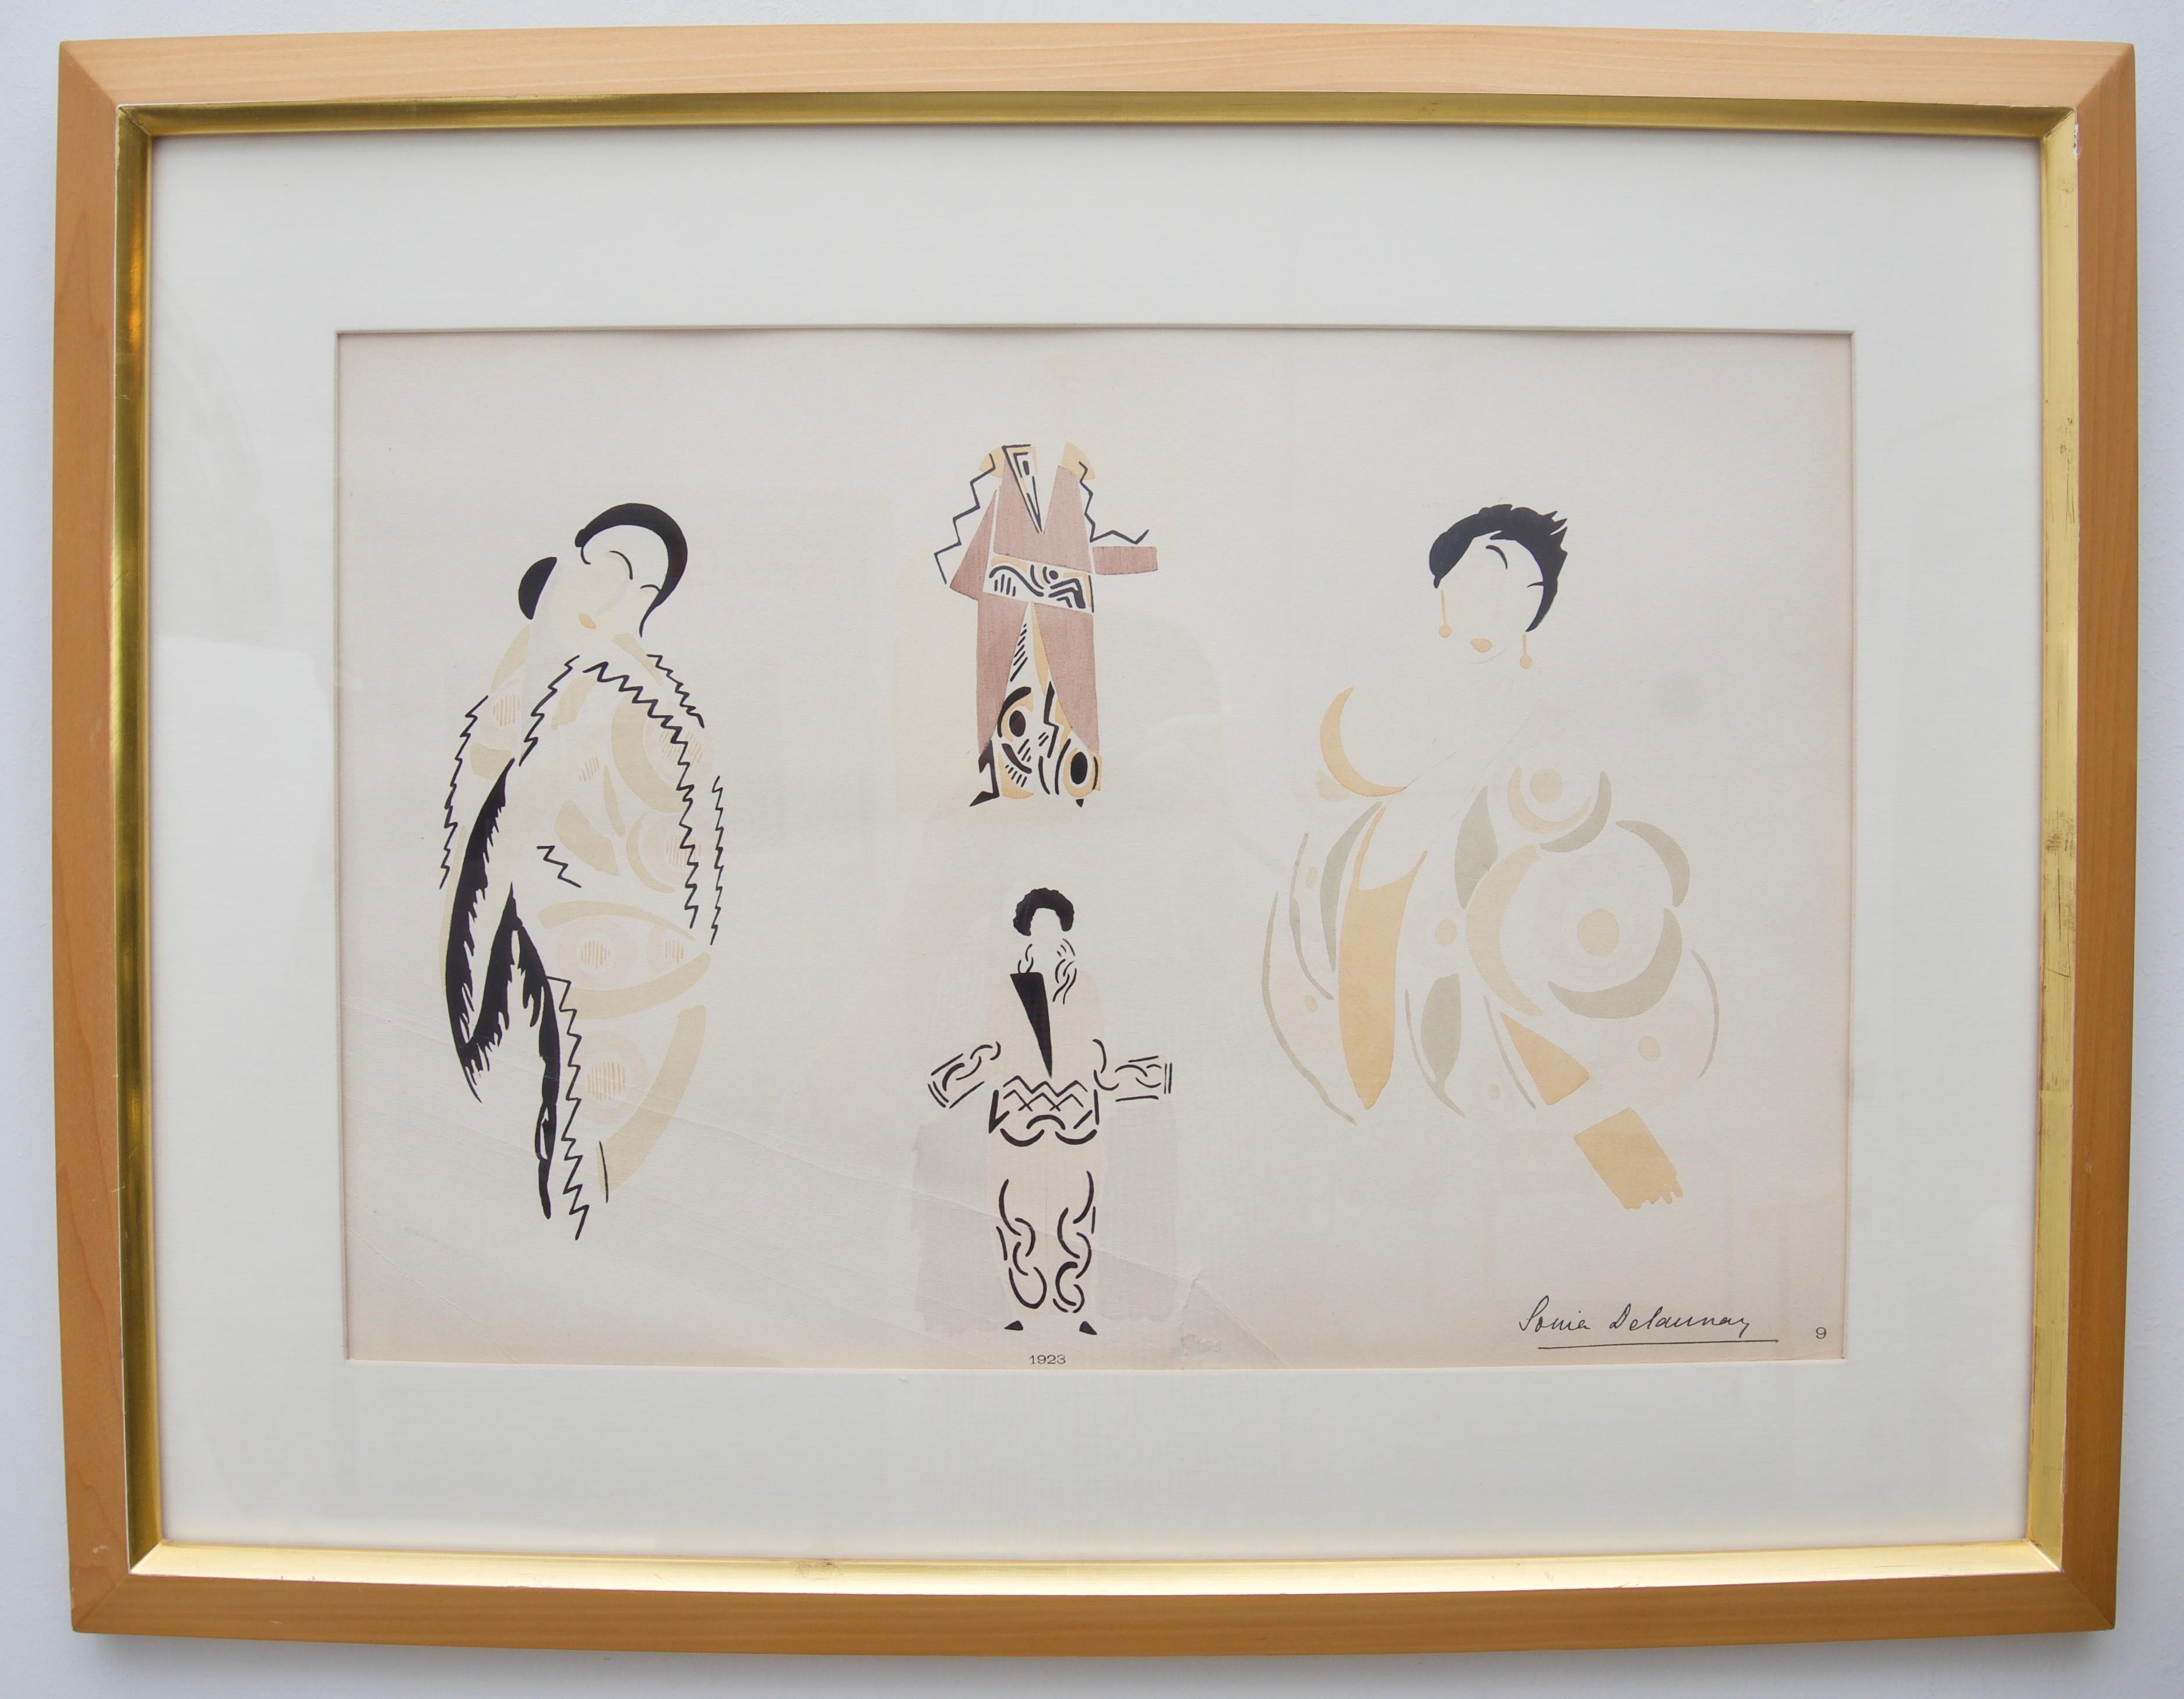 This stylish Art Deco French fashion plate gouache dates to 1923 and definitely takes on an orientalist flair with stylized Asian details in the garments.

About the fashion designer: 
Sonia Delaunay spent most of her working life in Paris. Along